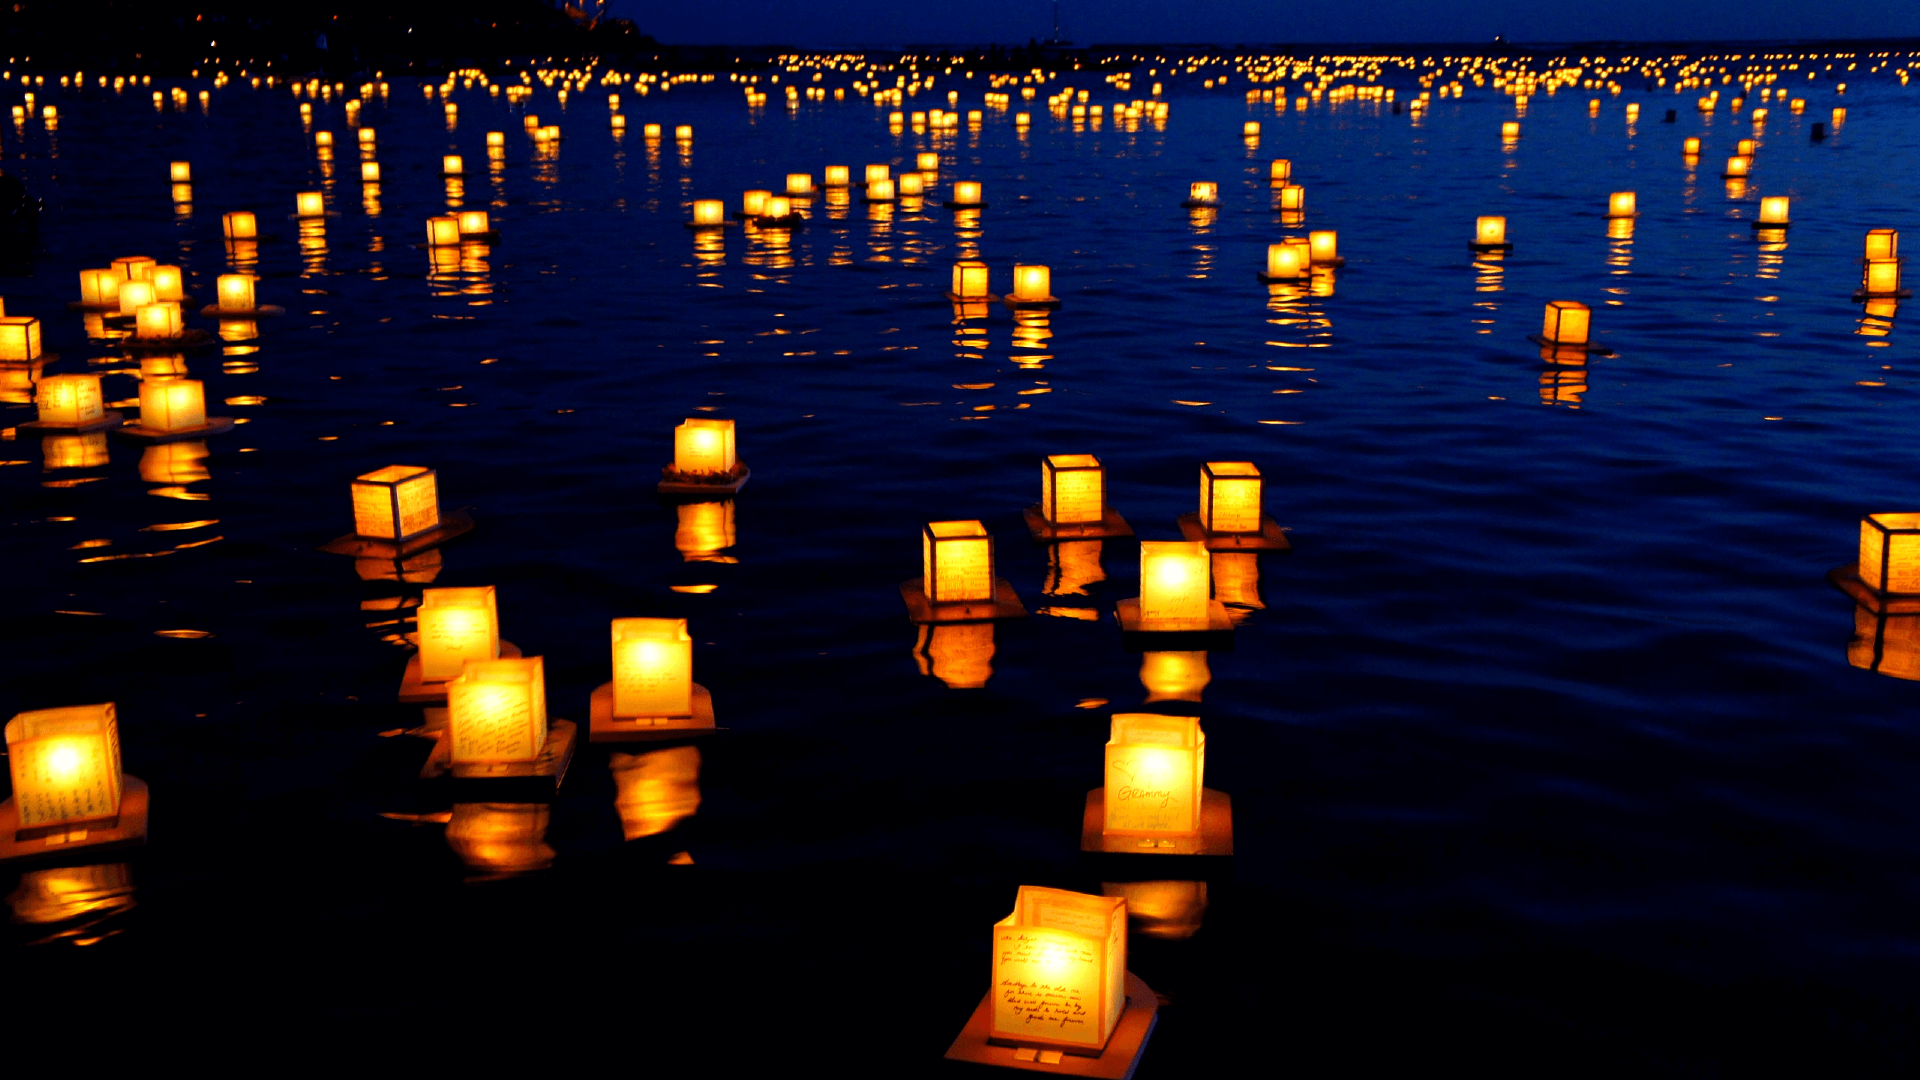 Hundreds of glowing paper lanterns floating on a lake in the night.